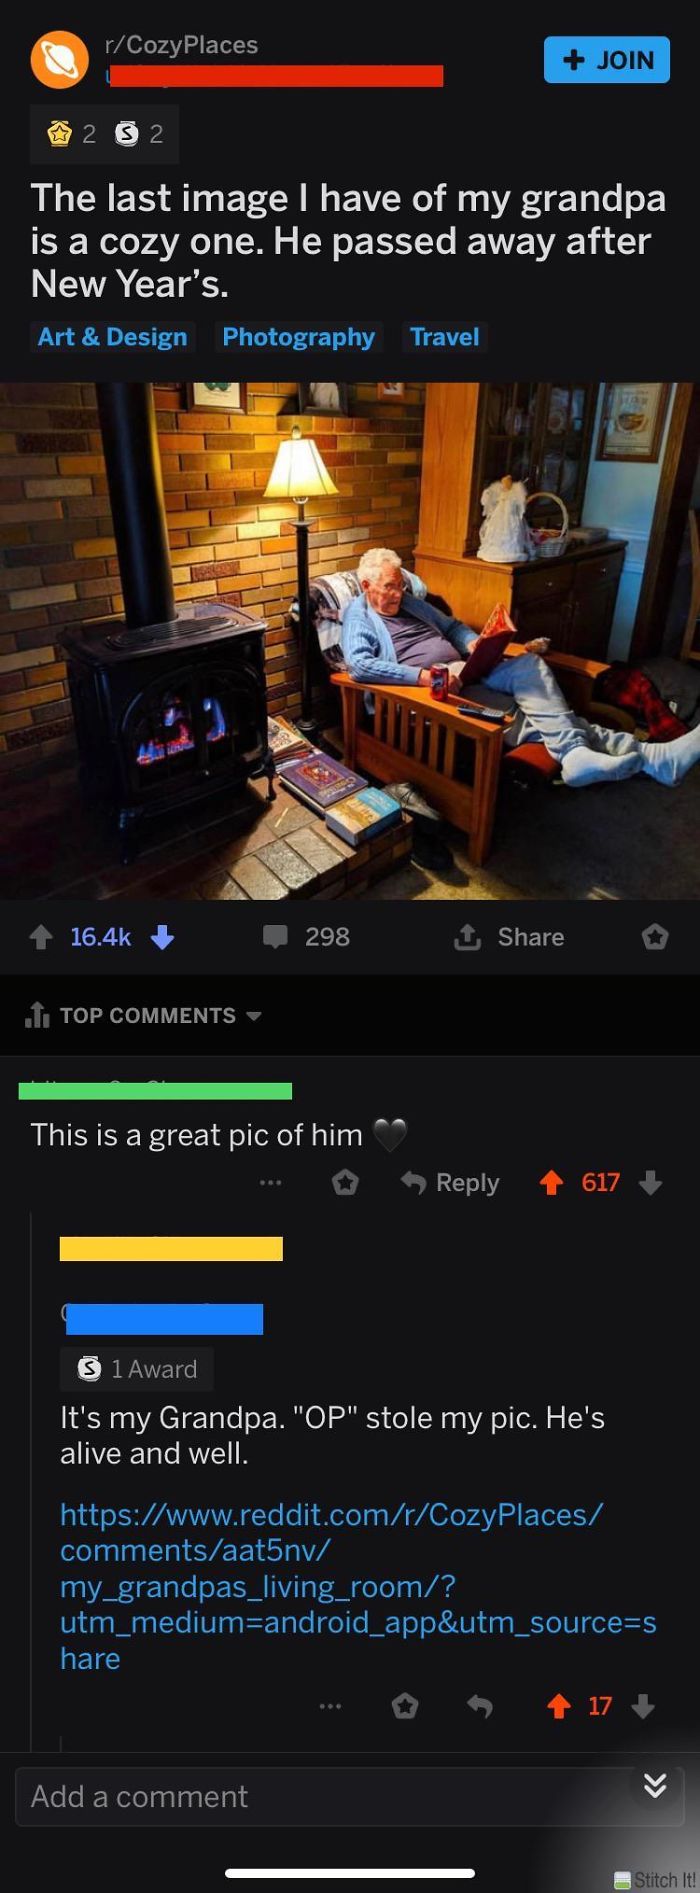 Guy Claims Picture Of Recently Deceased Grandpa. Real Op Show Up In Comments To Let Everyone Know Grandpa Is Still Alive And Well